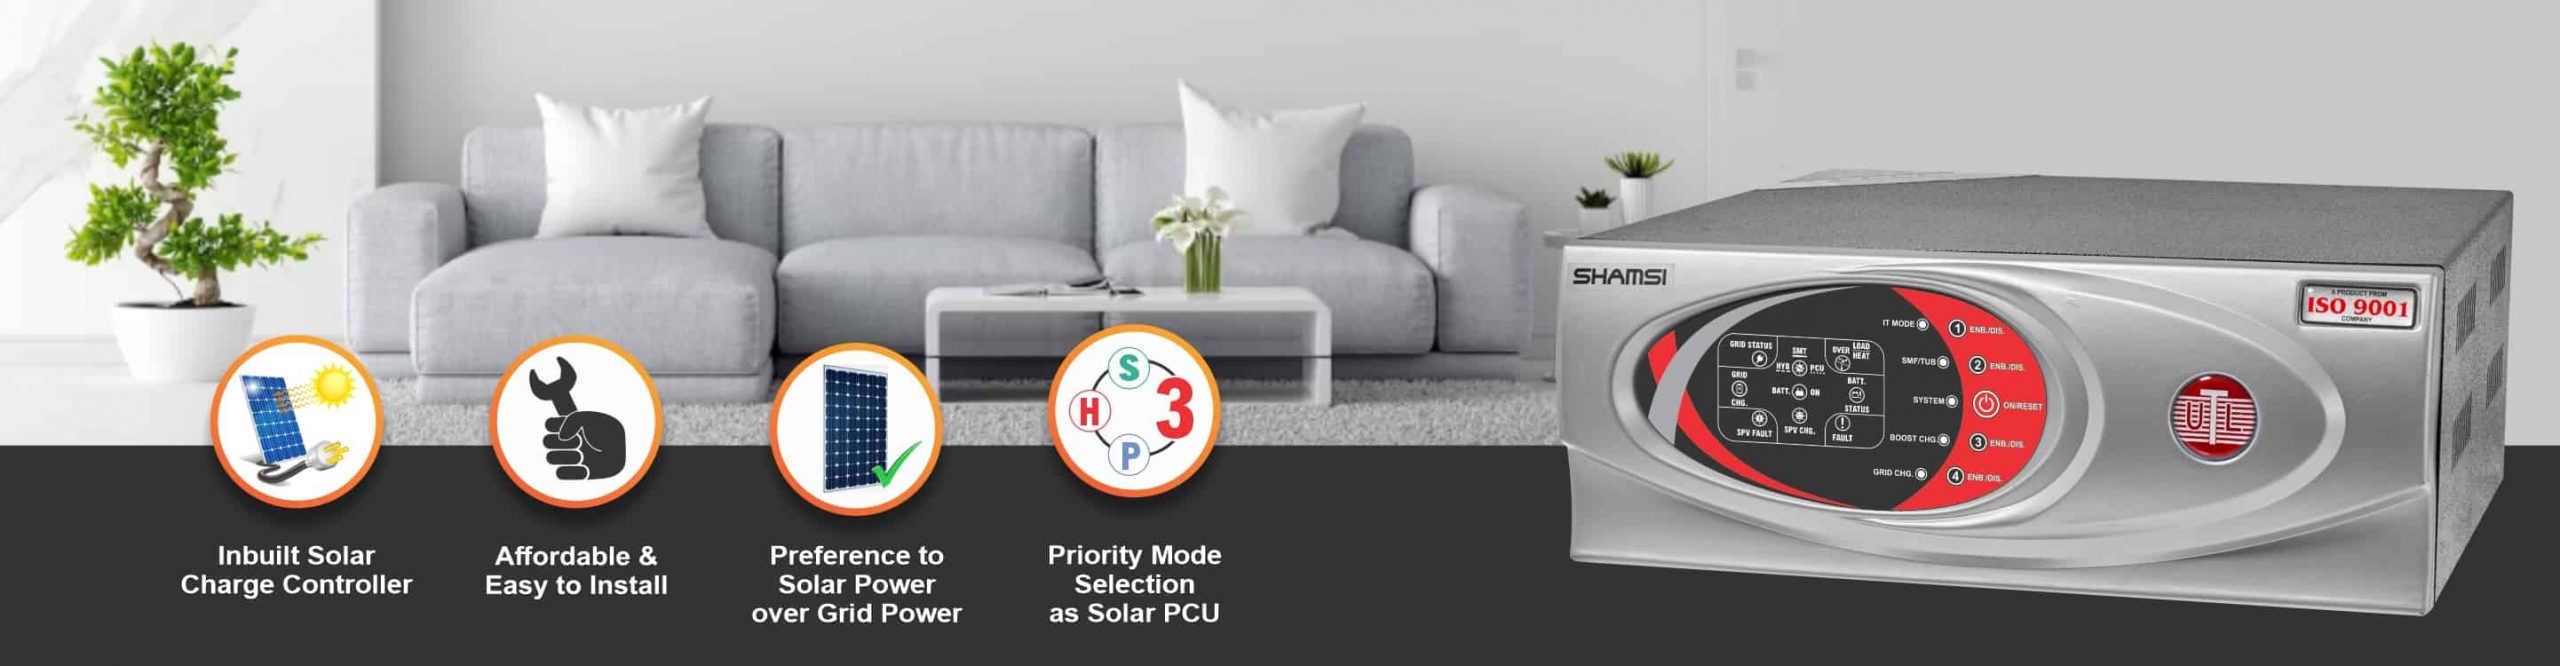 A shamsi solar inverter in the living room with its best features.